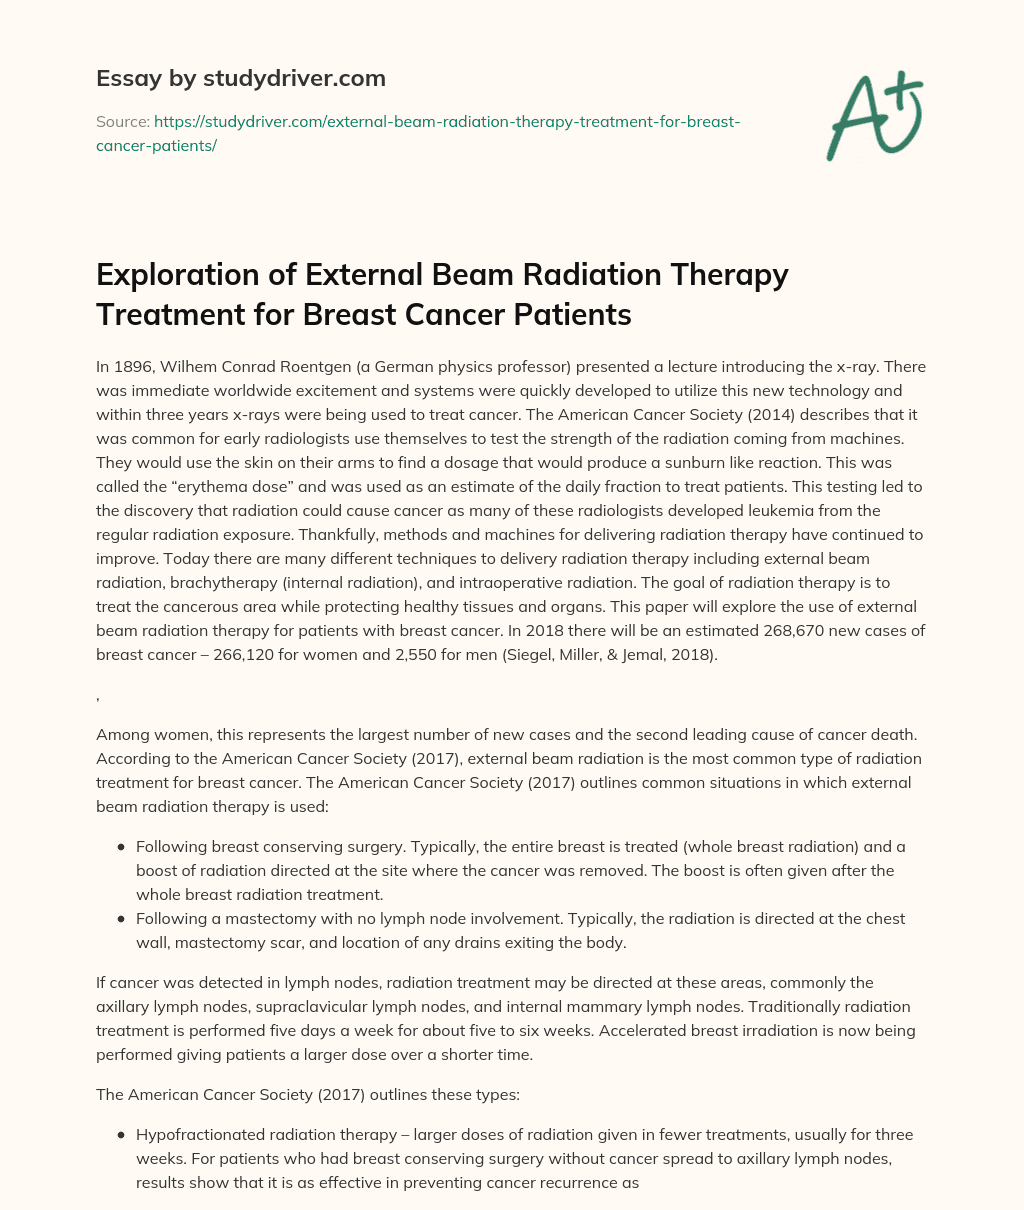 Exploration of External Beam Radiation Therapy Treatment for Breast Cancer Patients essay